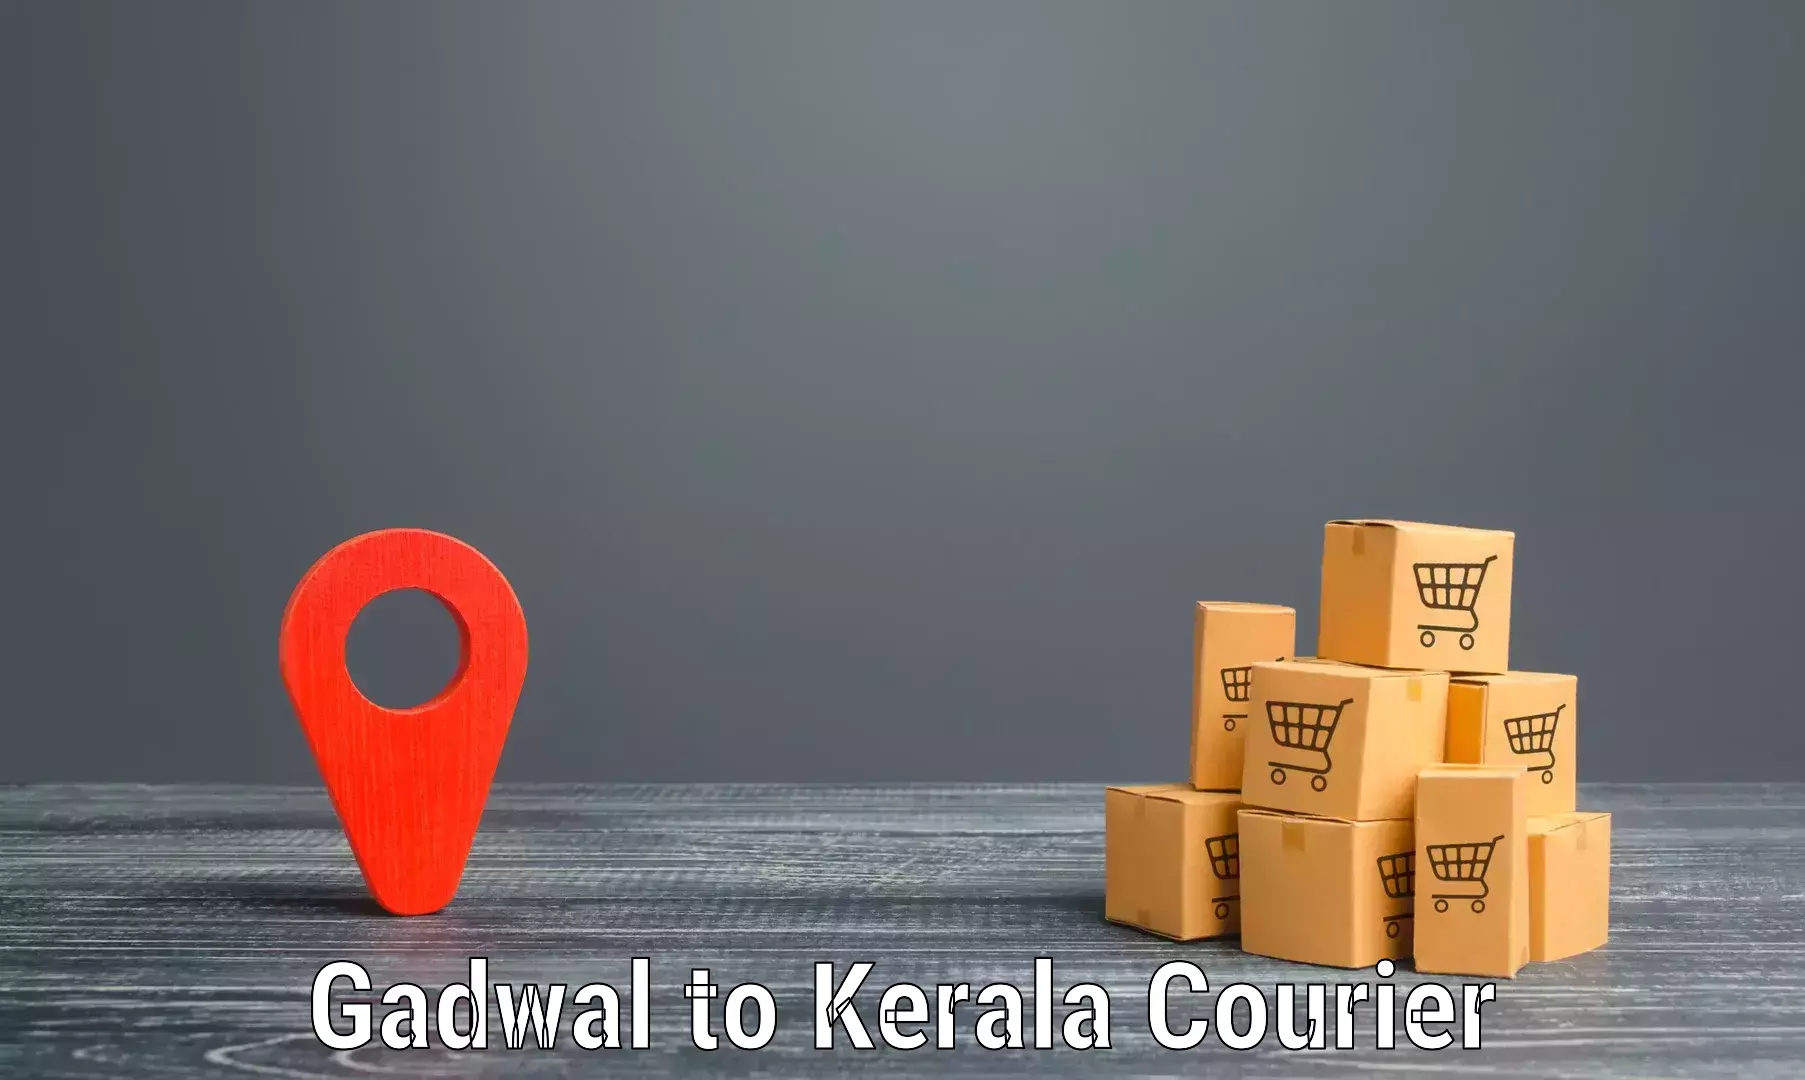 Corporate courier solutions Gadwal to Kochi